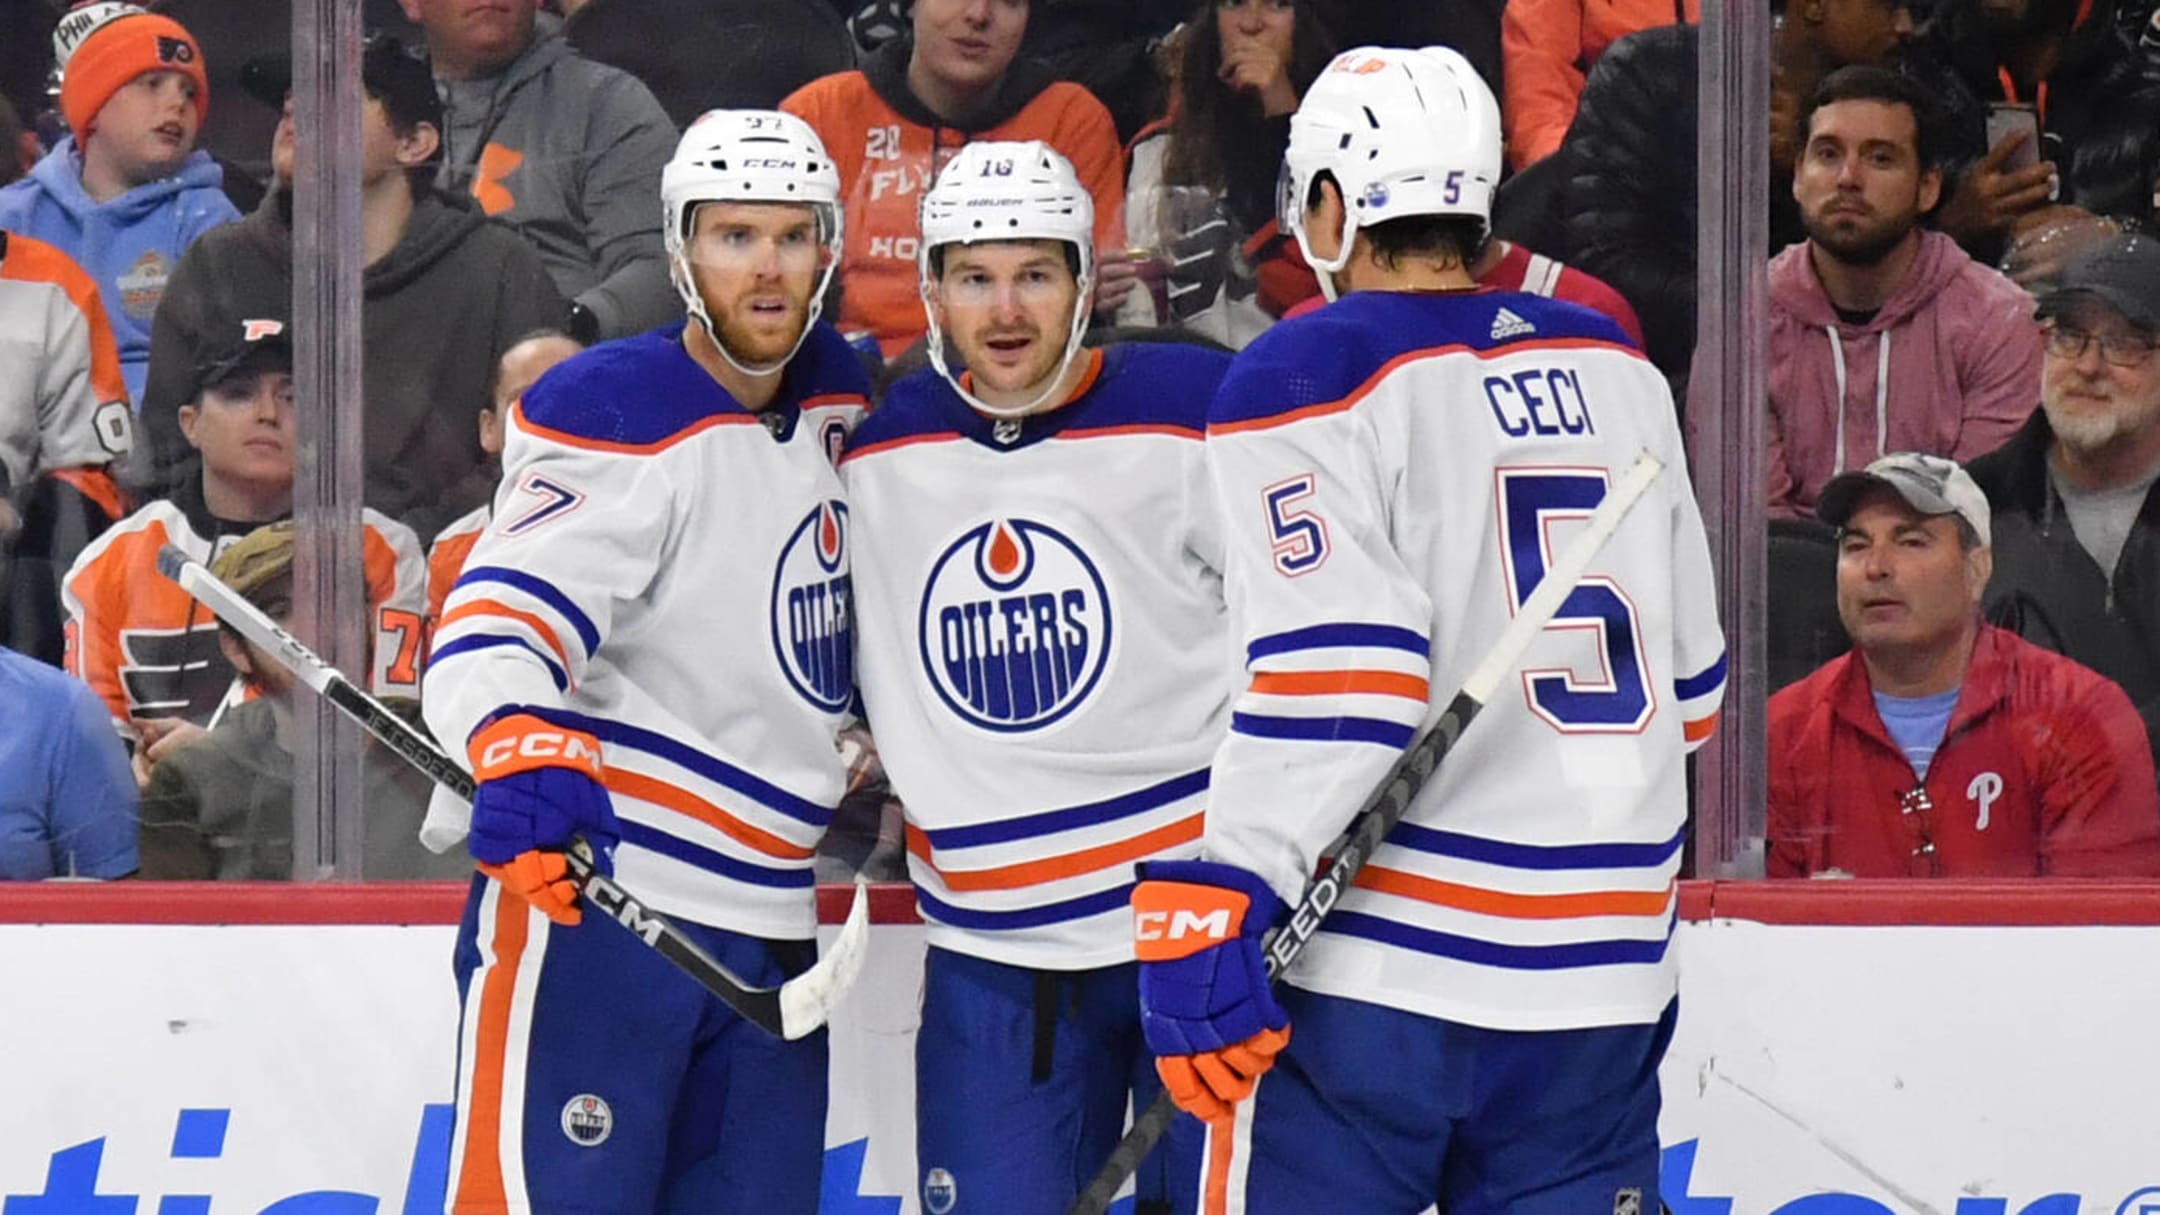 Oilers to host Flames in Heritage Classic next season